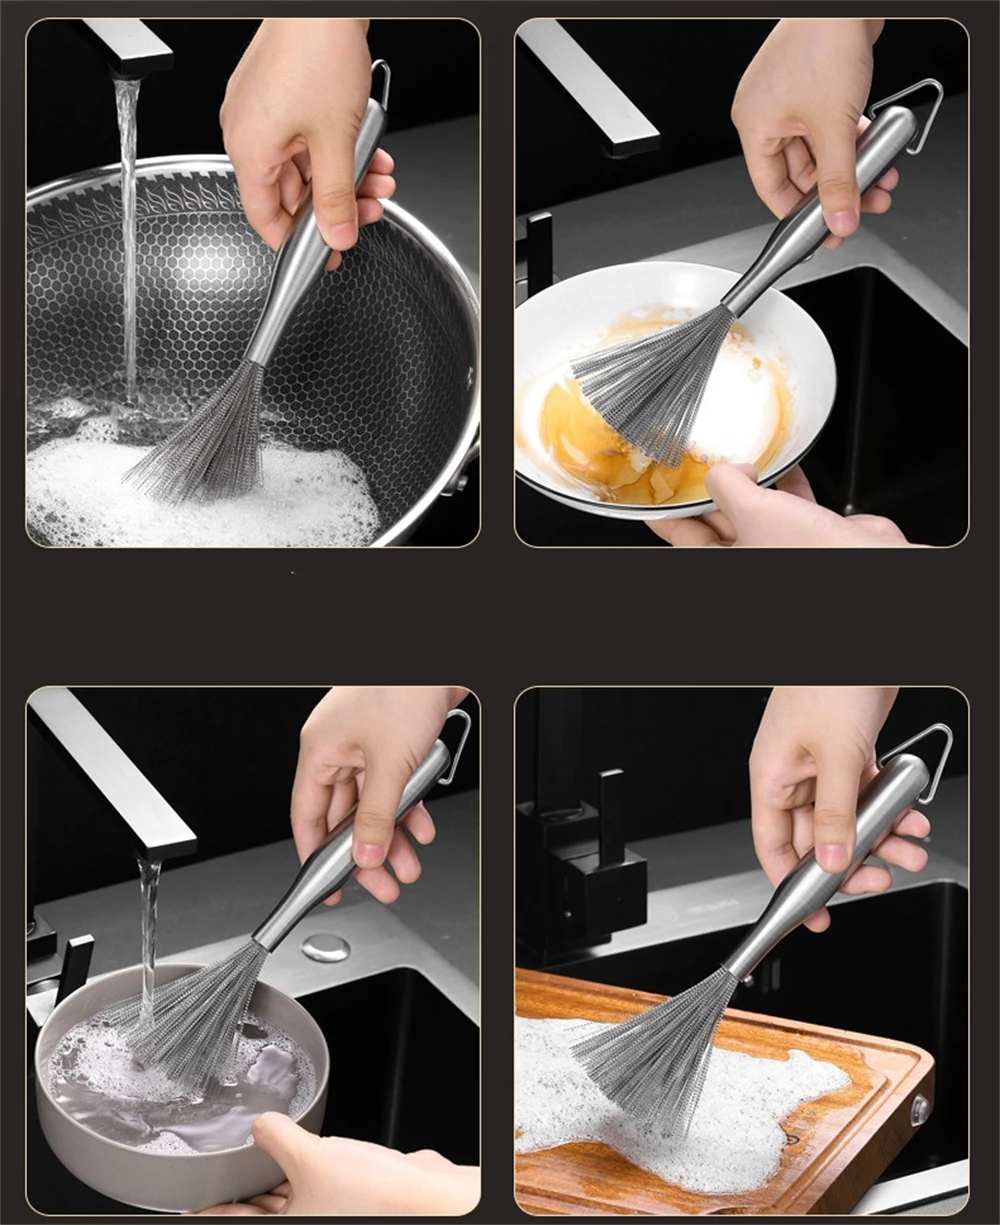 https://ae01.alicdn.com/kf/S1c5de7a8477f42909713373c49f63c1fc/5pcs-Flexible-Stainless-Steel-Pot-Scrub-Brush-for-Washing-Dishes-Pots-Pans.jpg